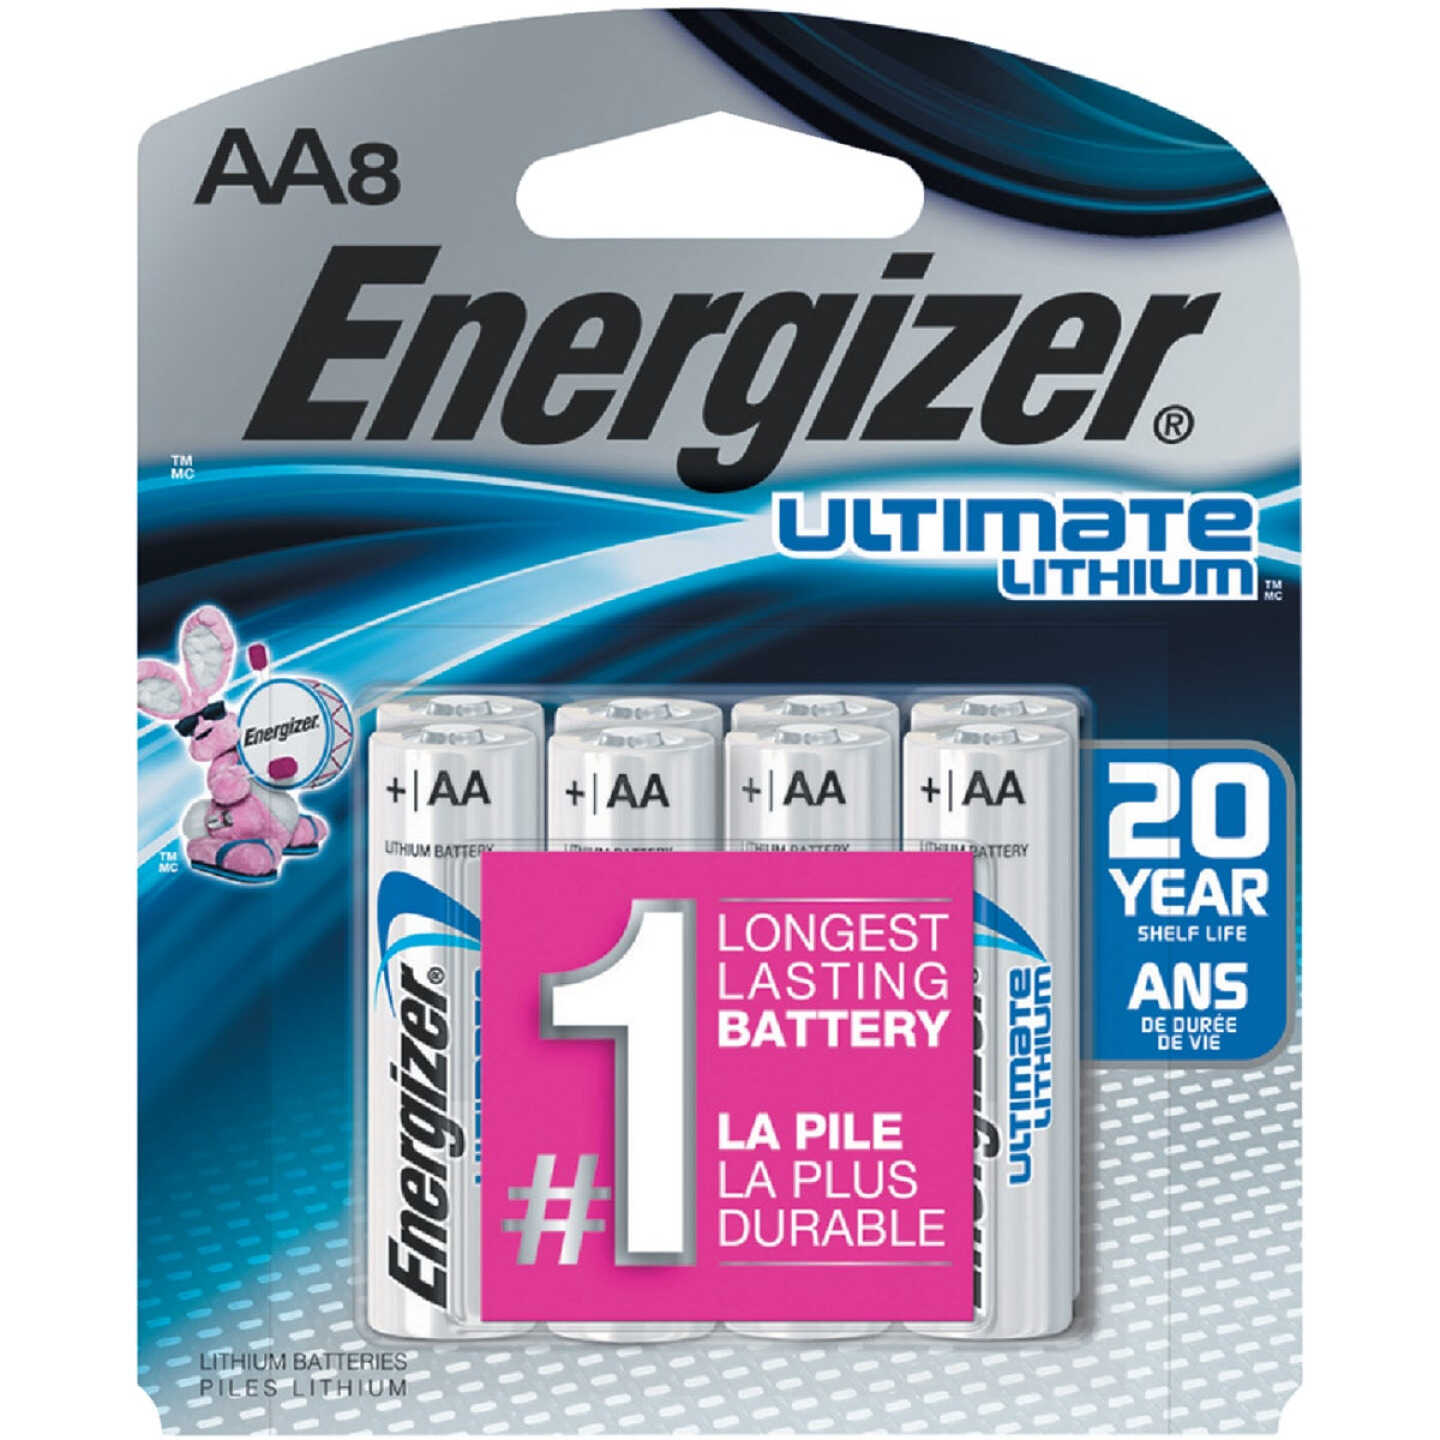 Energizer Ultimate Lithium AA L91 battery Retail Packaging – JCB Products